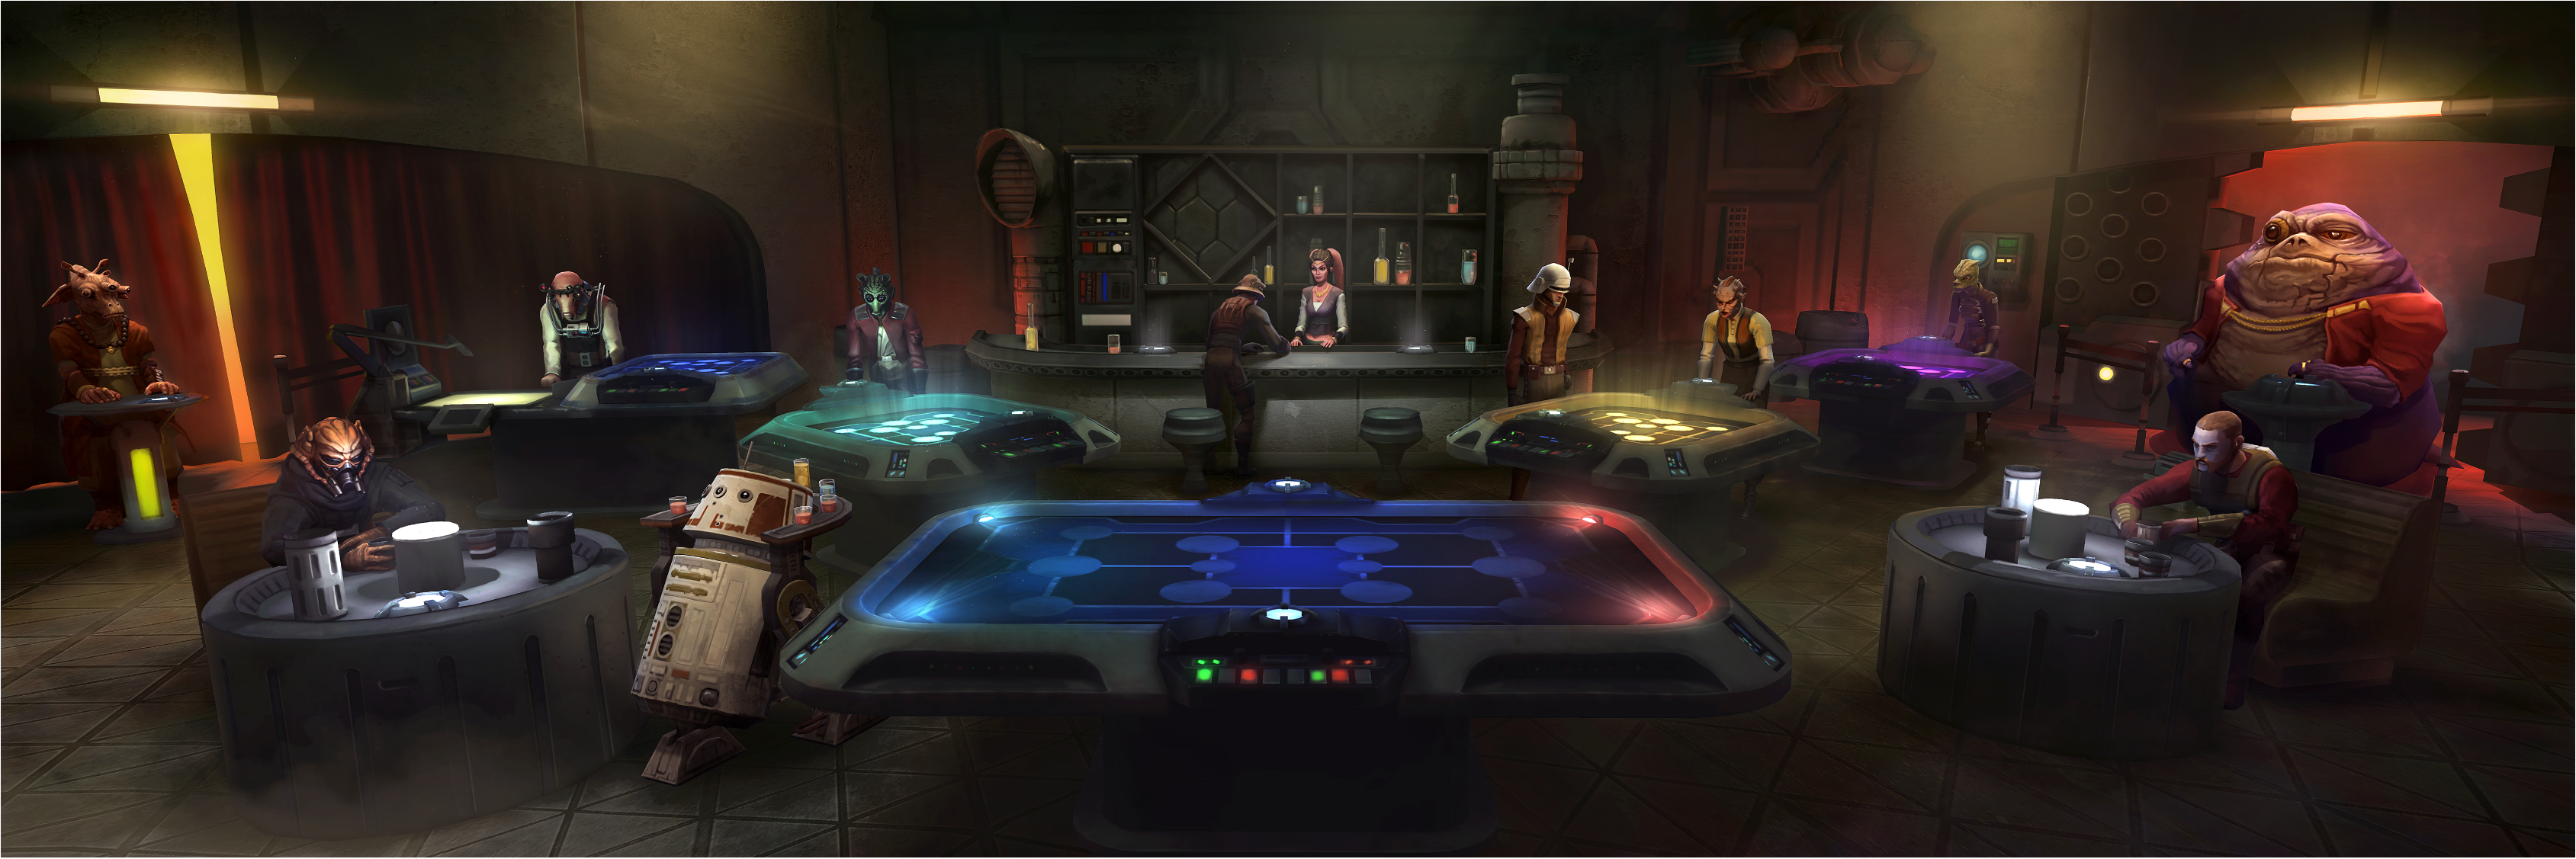 Direct link to the Cantina background used by the Devs on the trello Dev tracker site. Just in case someone wants it as background